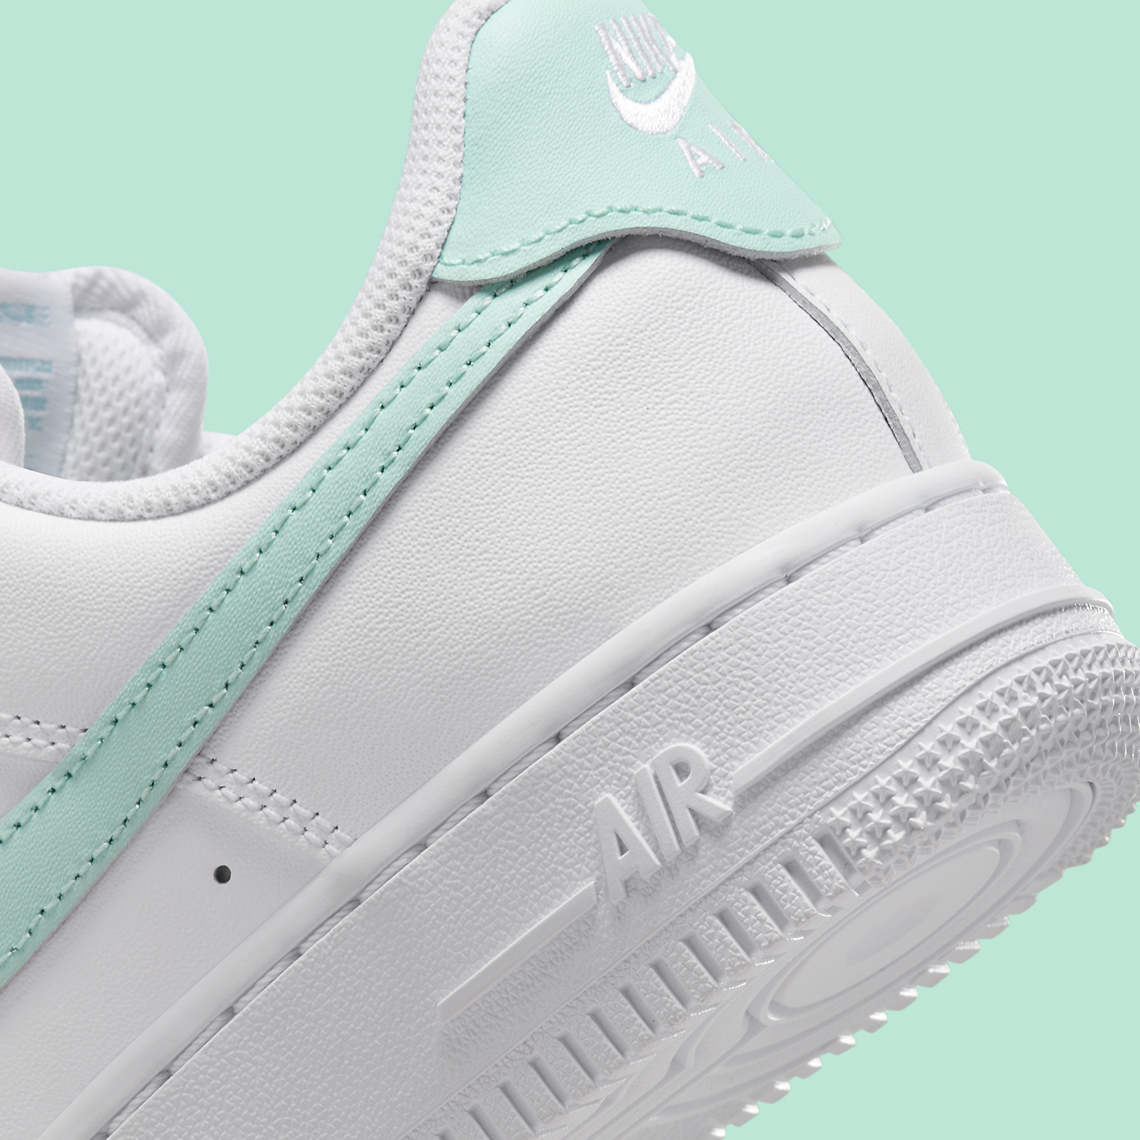 Nike Air Force 1 Low Flyease White Jade Ice Dx5883 101 6